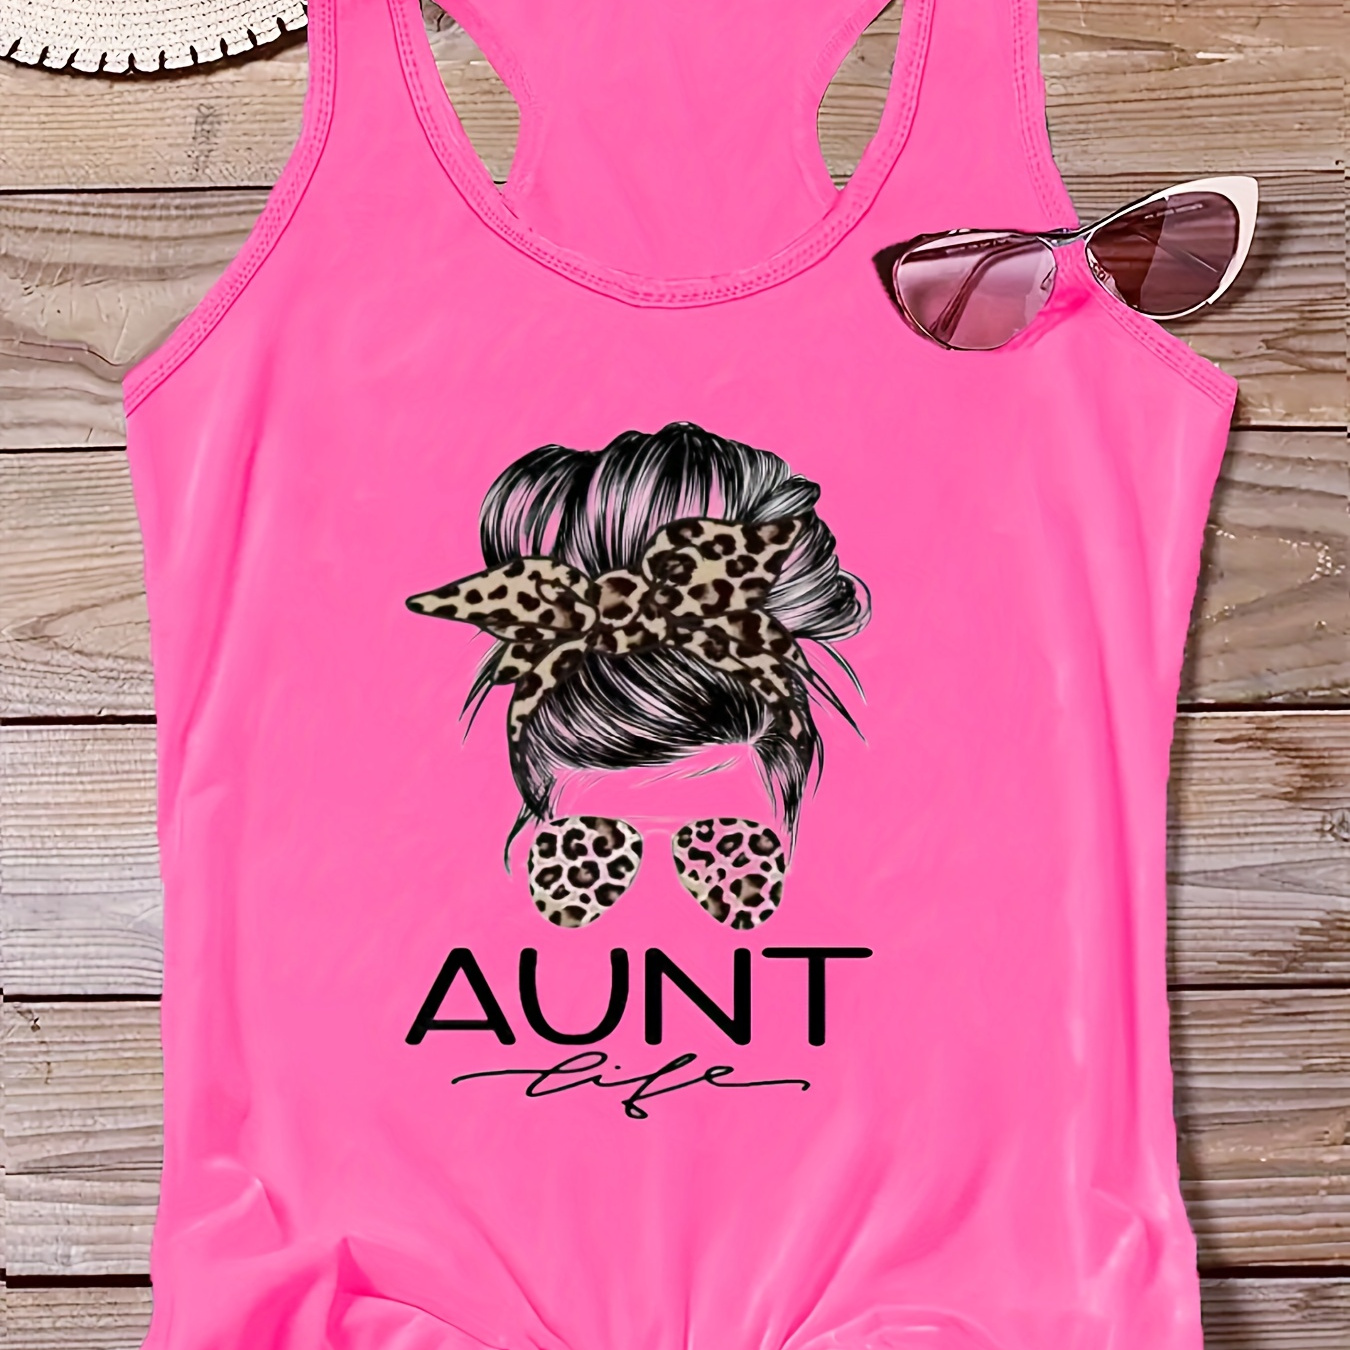 

Plus Size Aunt Letter Print Tank Top, Casual Crew Neck Sleeveless Tank Top For Summer, Women's Plus Size clothing